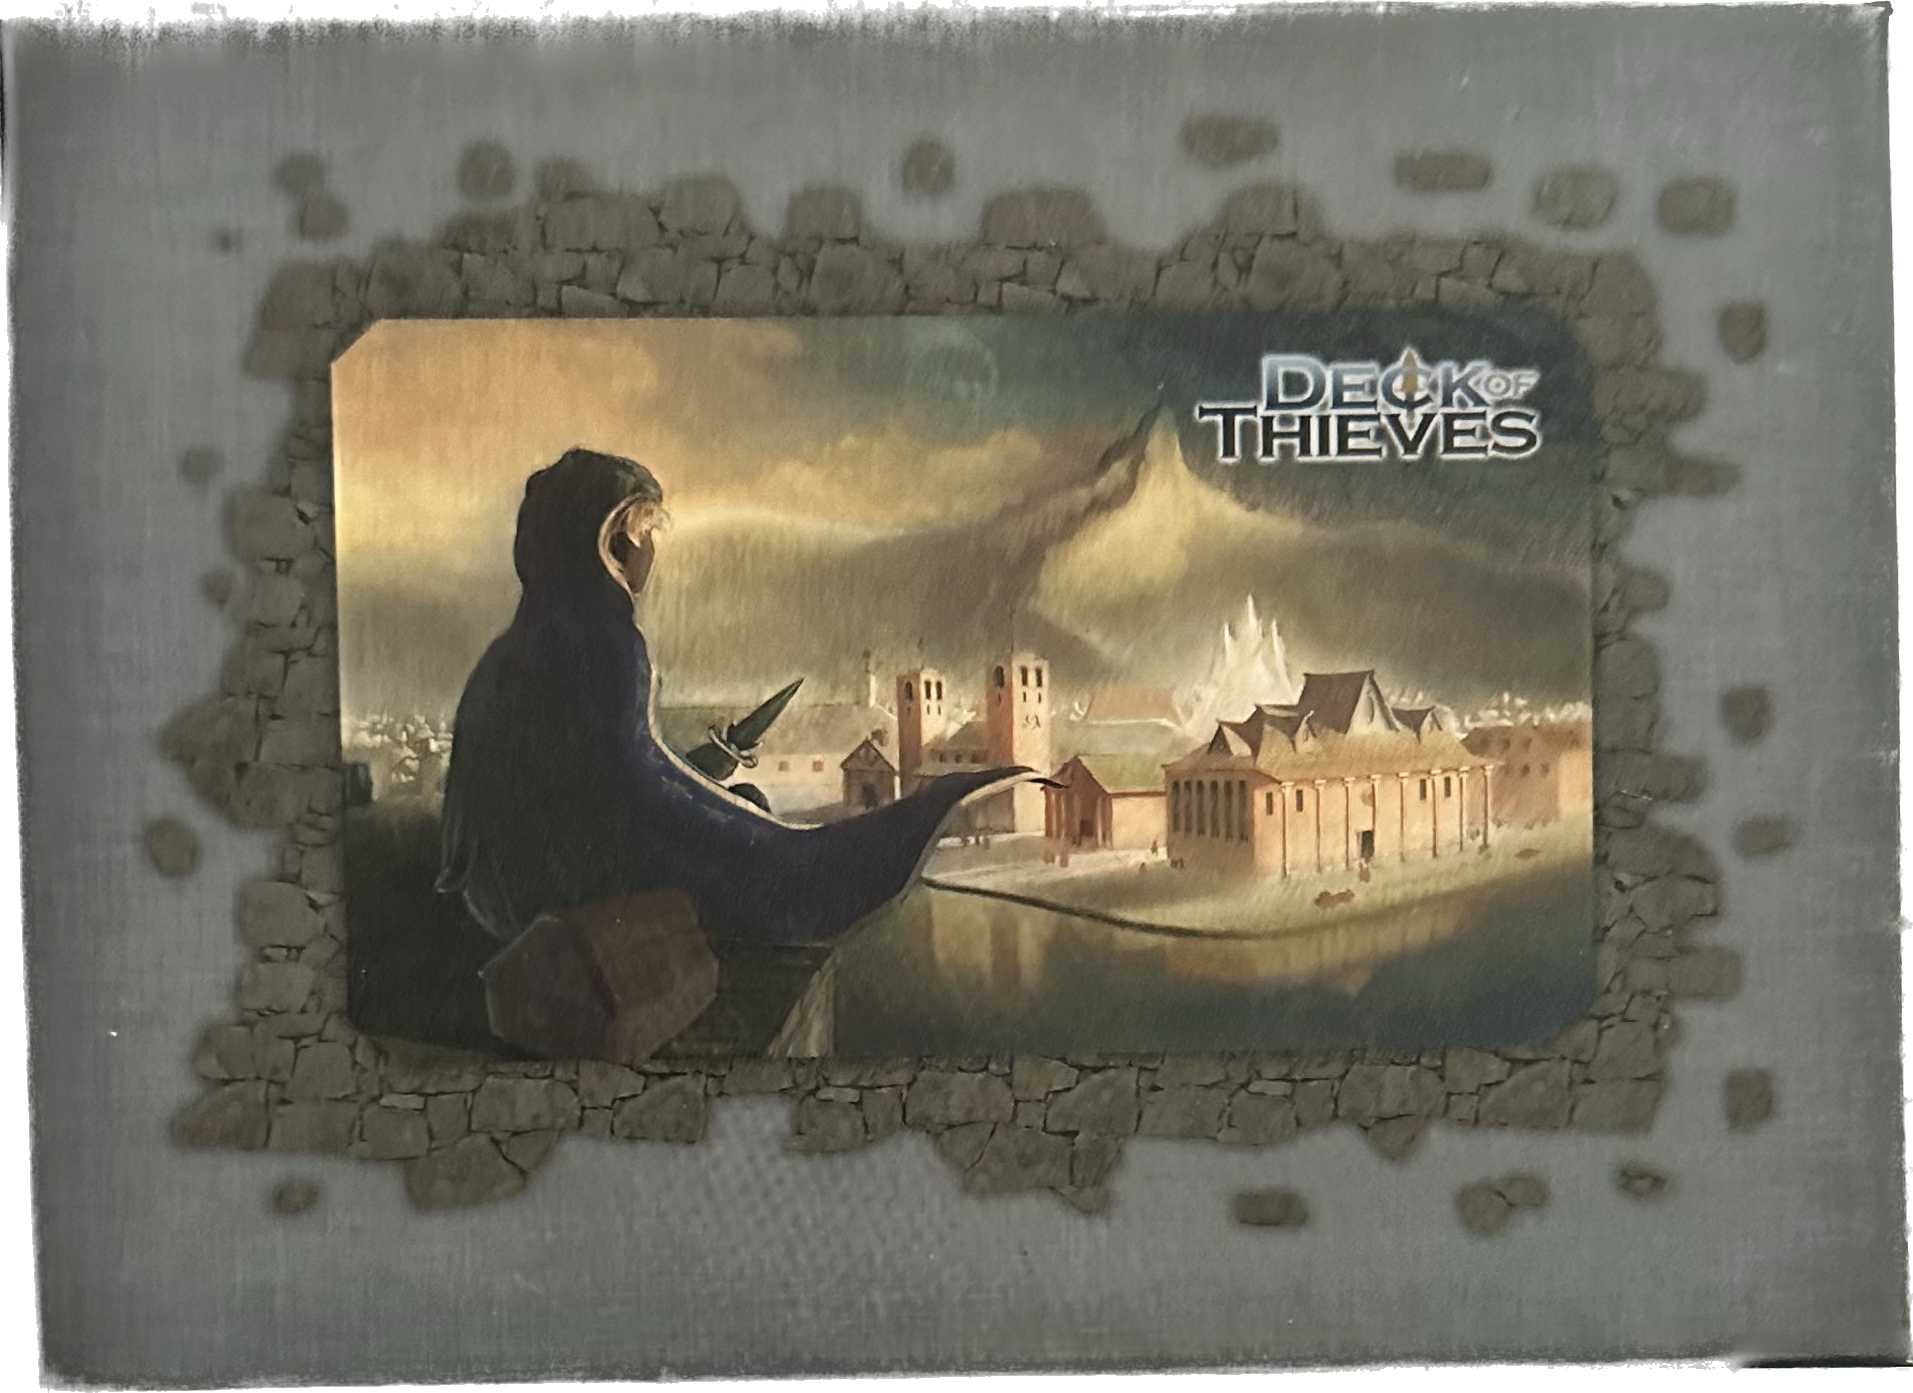 Deck of Thieves